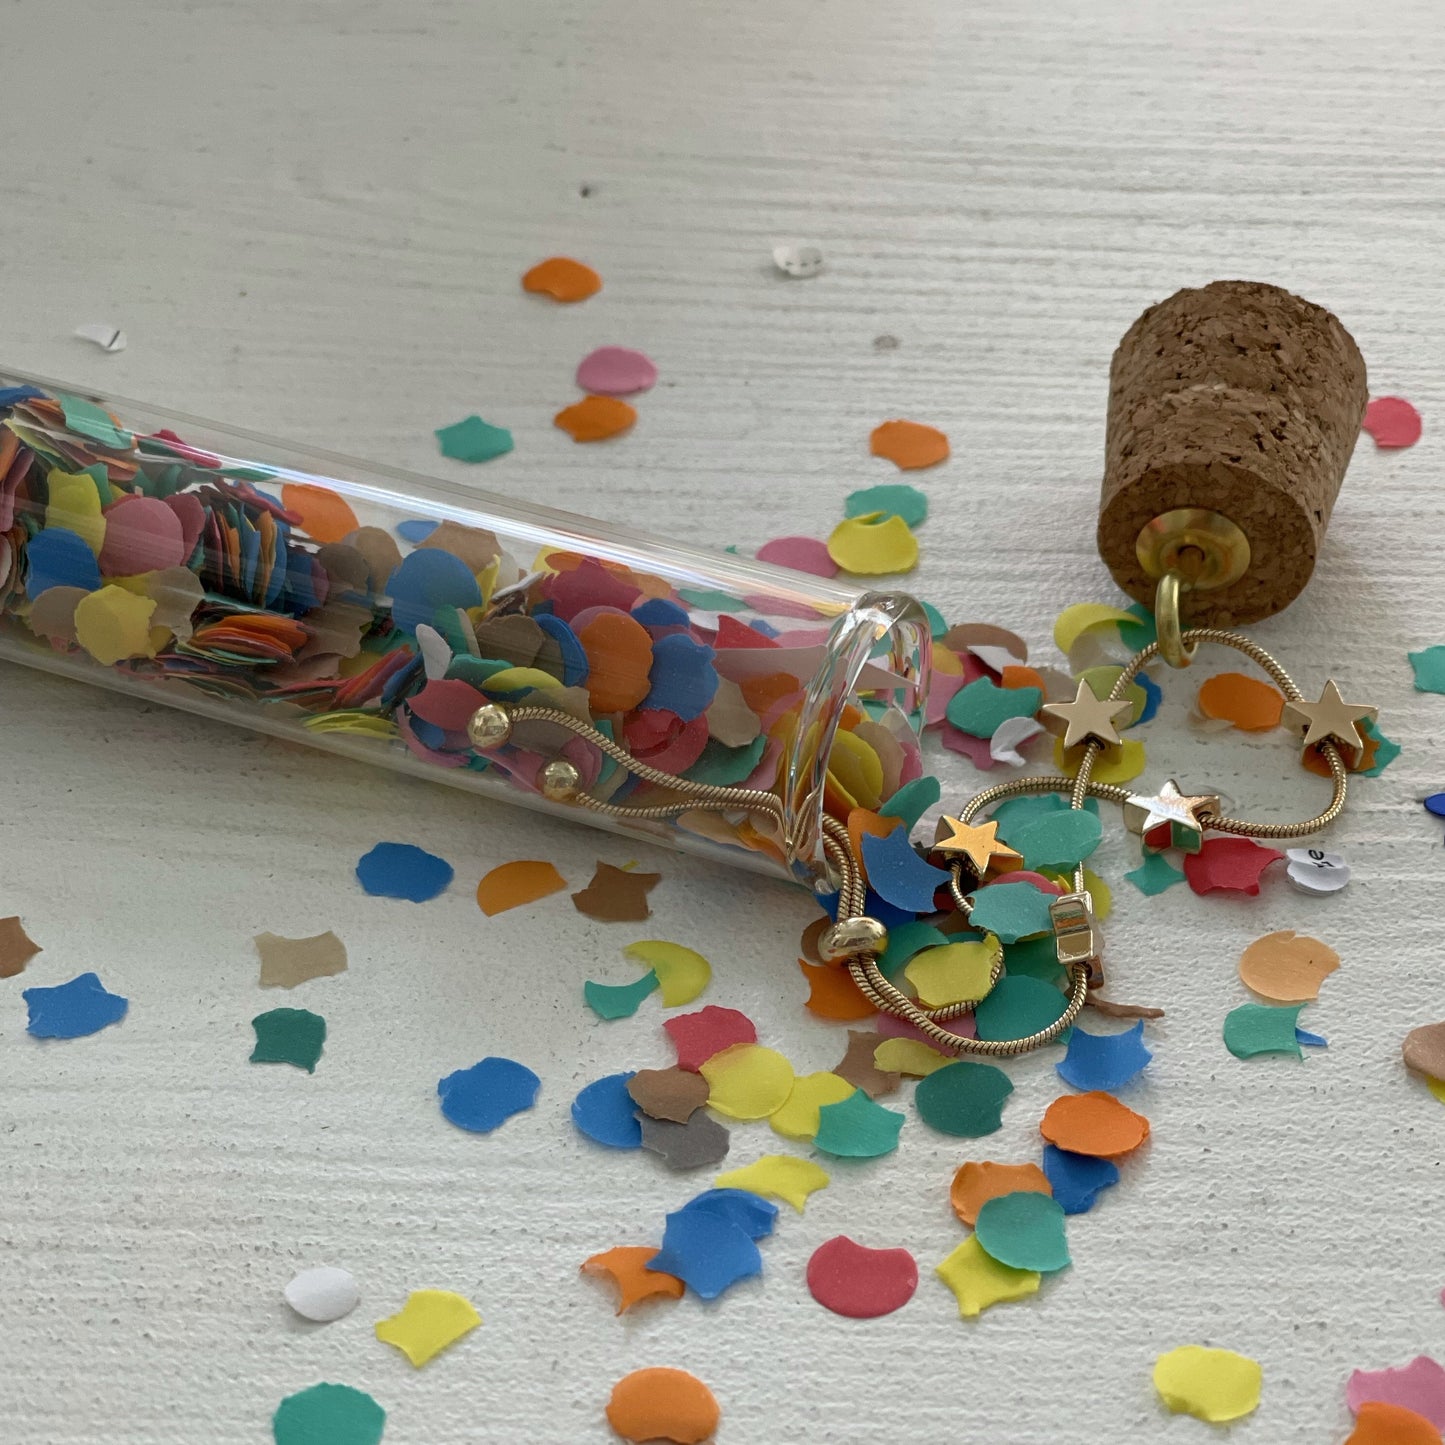 gold star bracelet in glass tube with confetti